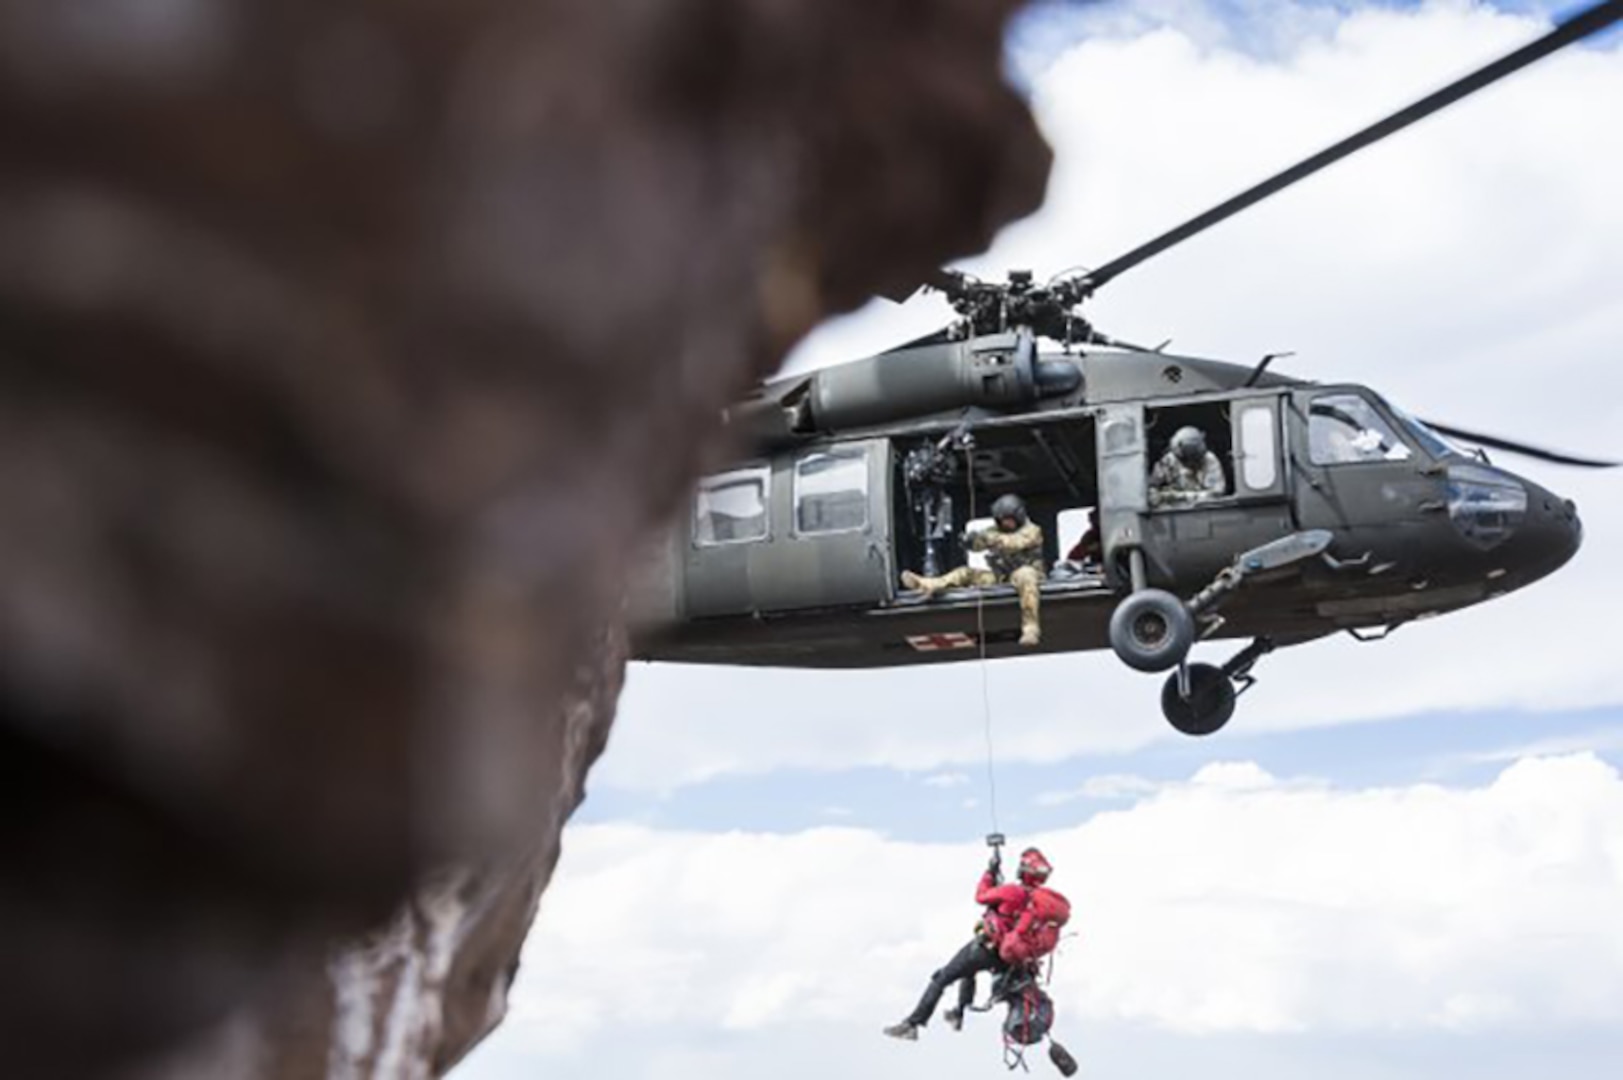 A UH-60 Black Hawk helicopter crew from the High-Altitude Army National Guard Aviation Training Site lowers a member of Mountain Rescue Aspen down to an injured hiker near the North Maroon Bells Peak near Aspen, Colorado, July 24, 2018. Colorado National Guard Soldiers at HAATS assist in about 20 rescue missions each year.